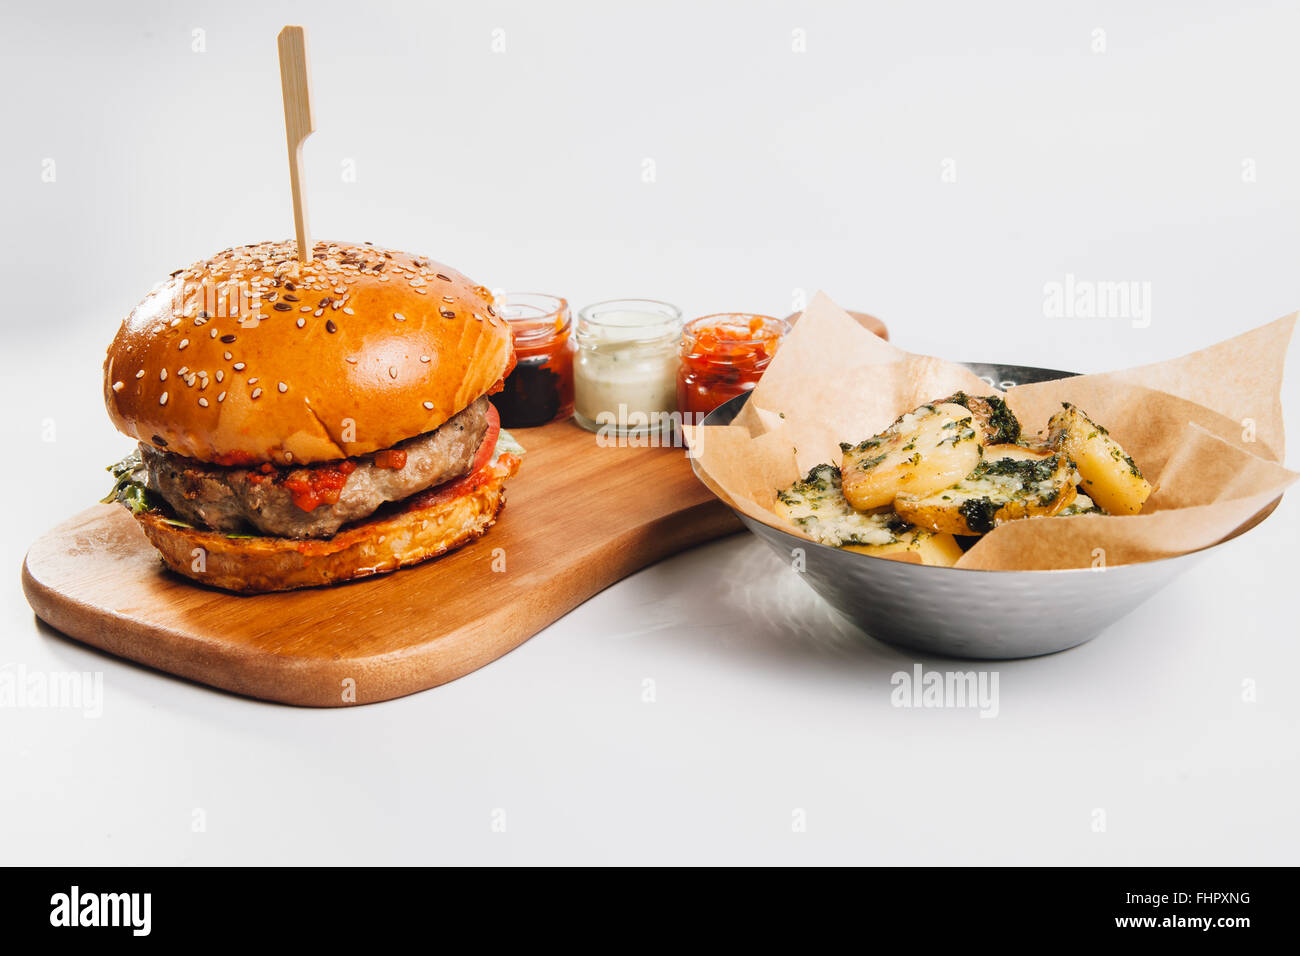 burger with fries on wooden plate Stock Photo